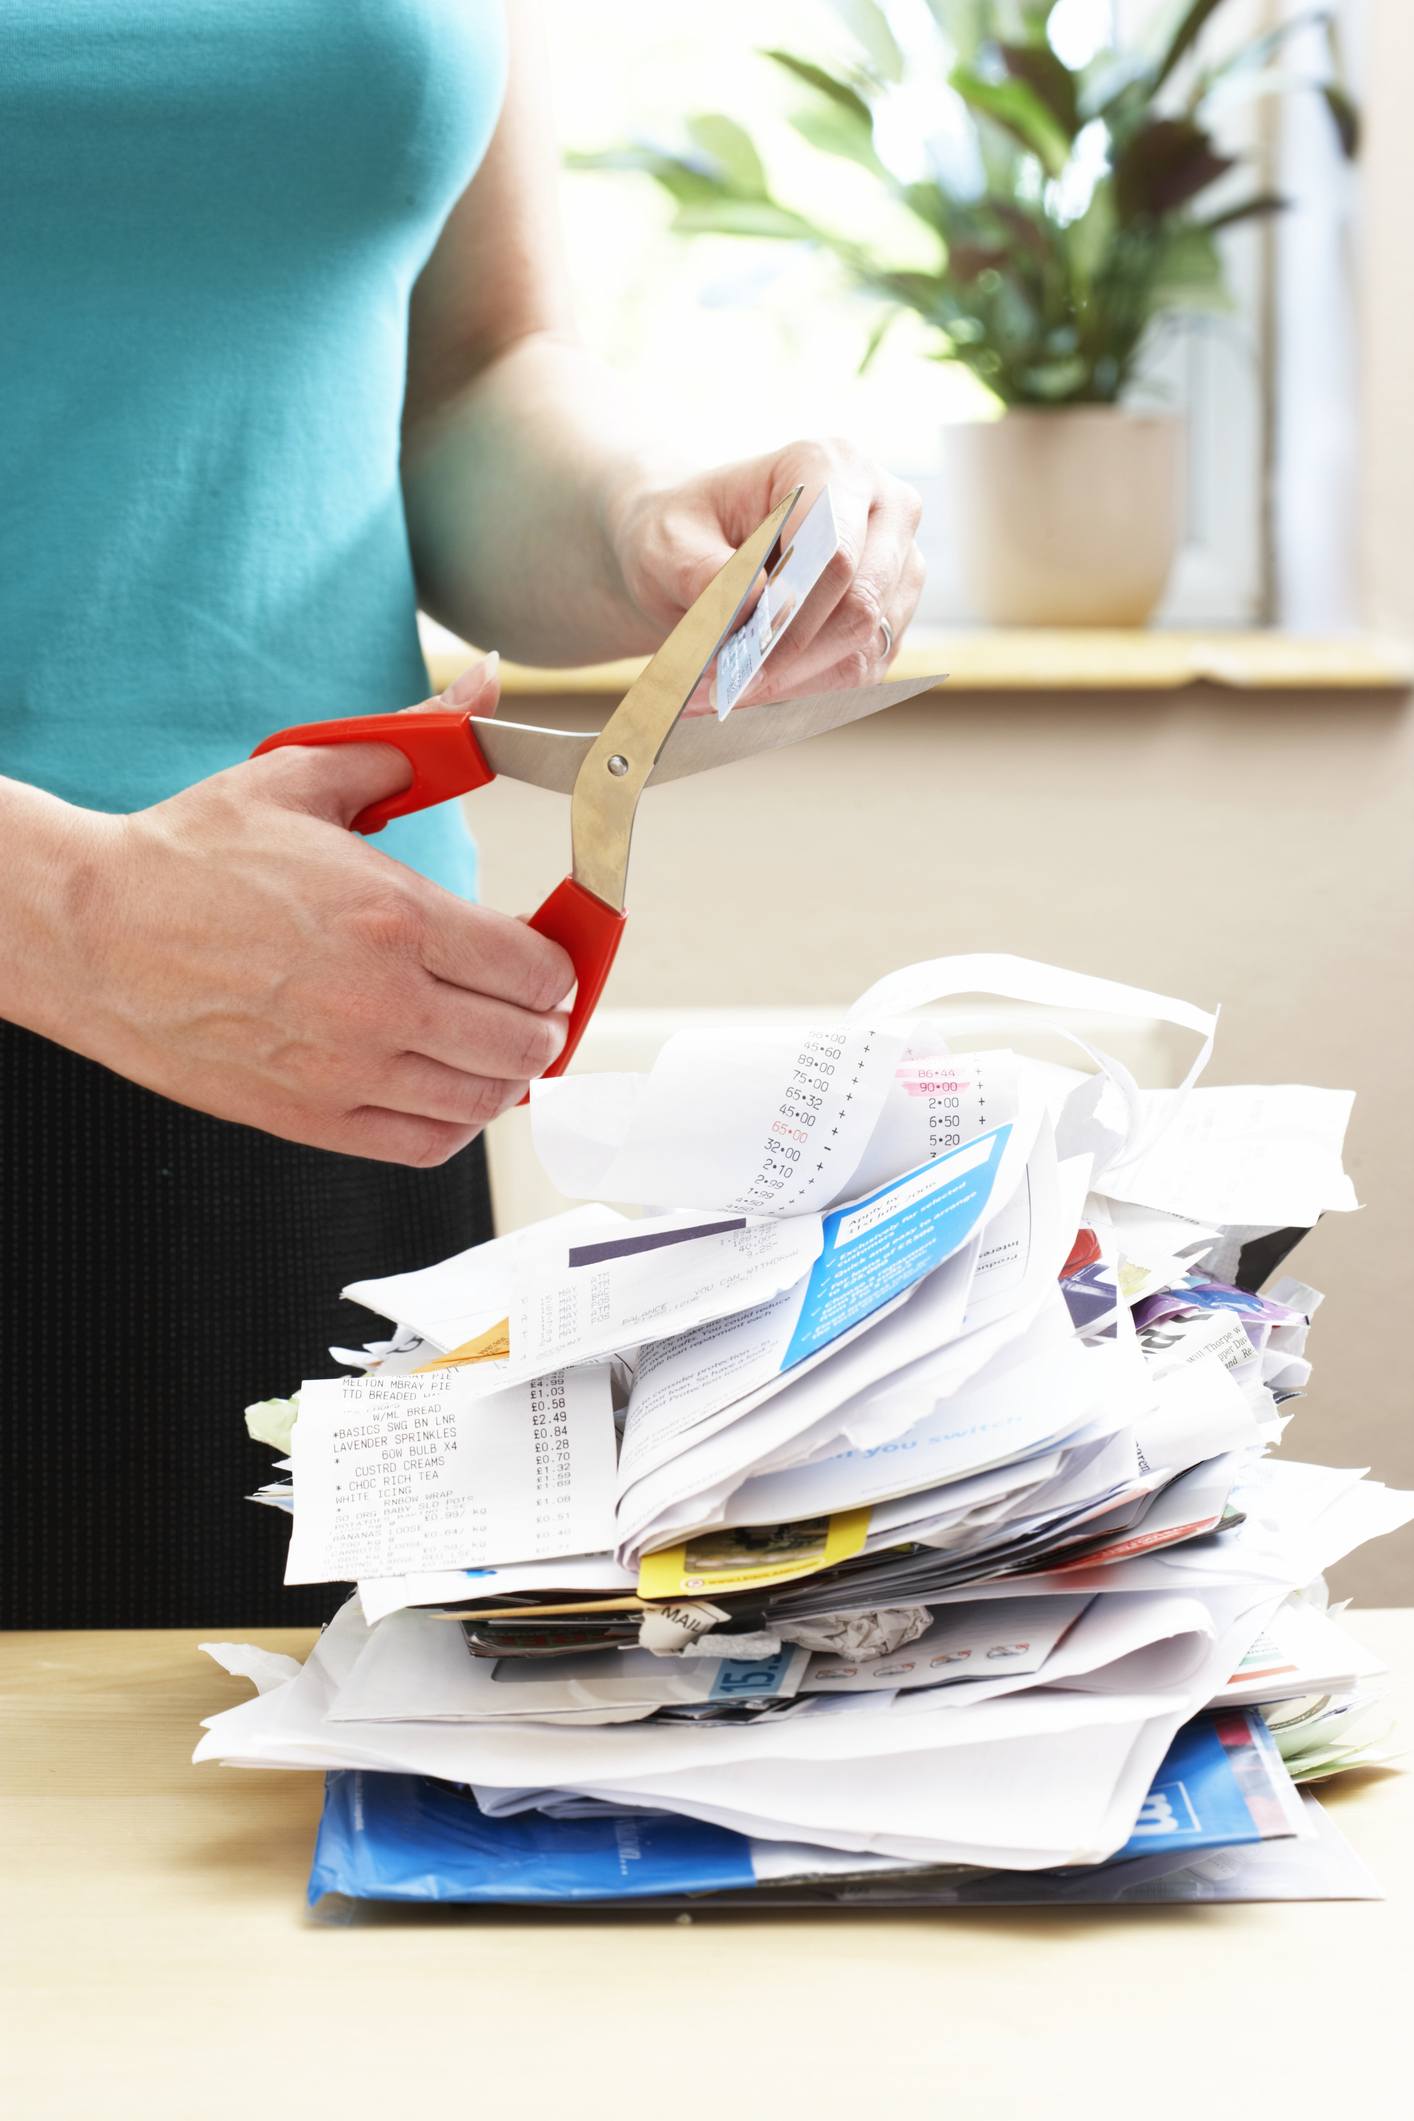 Woman cutting credit card over piled receipts and bills, close-up